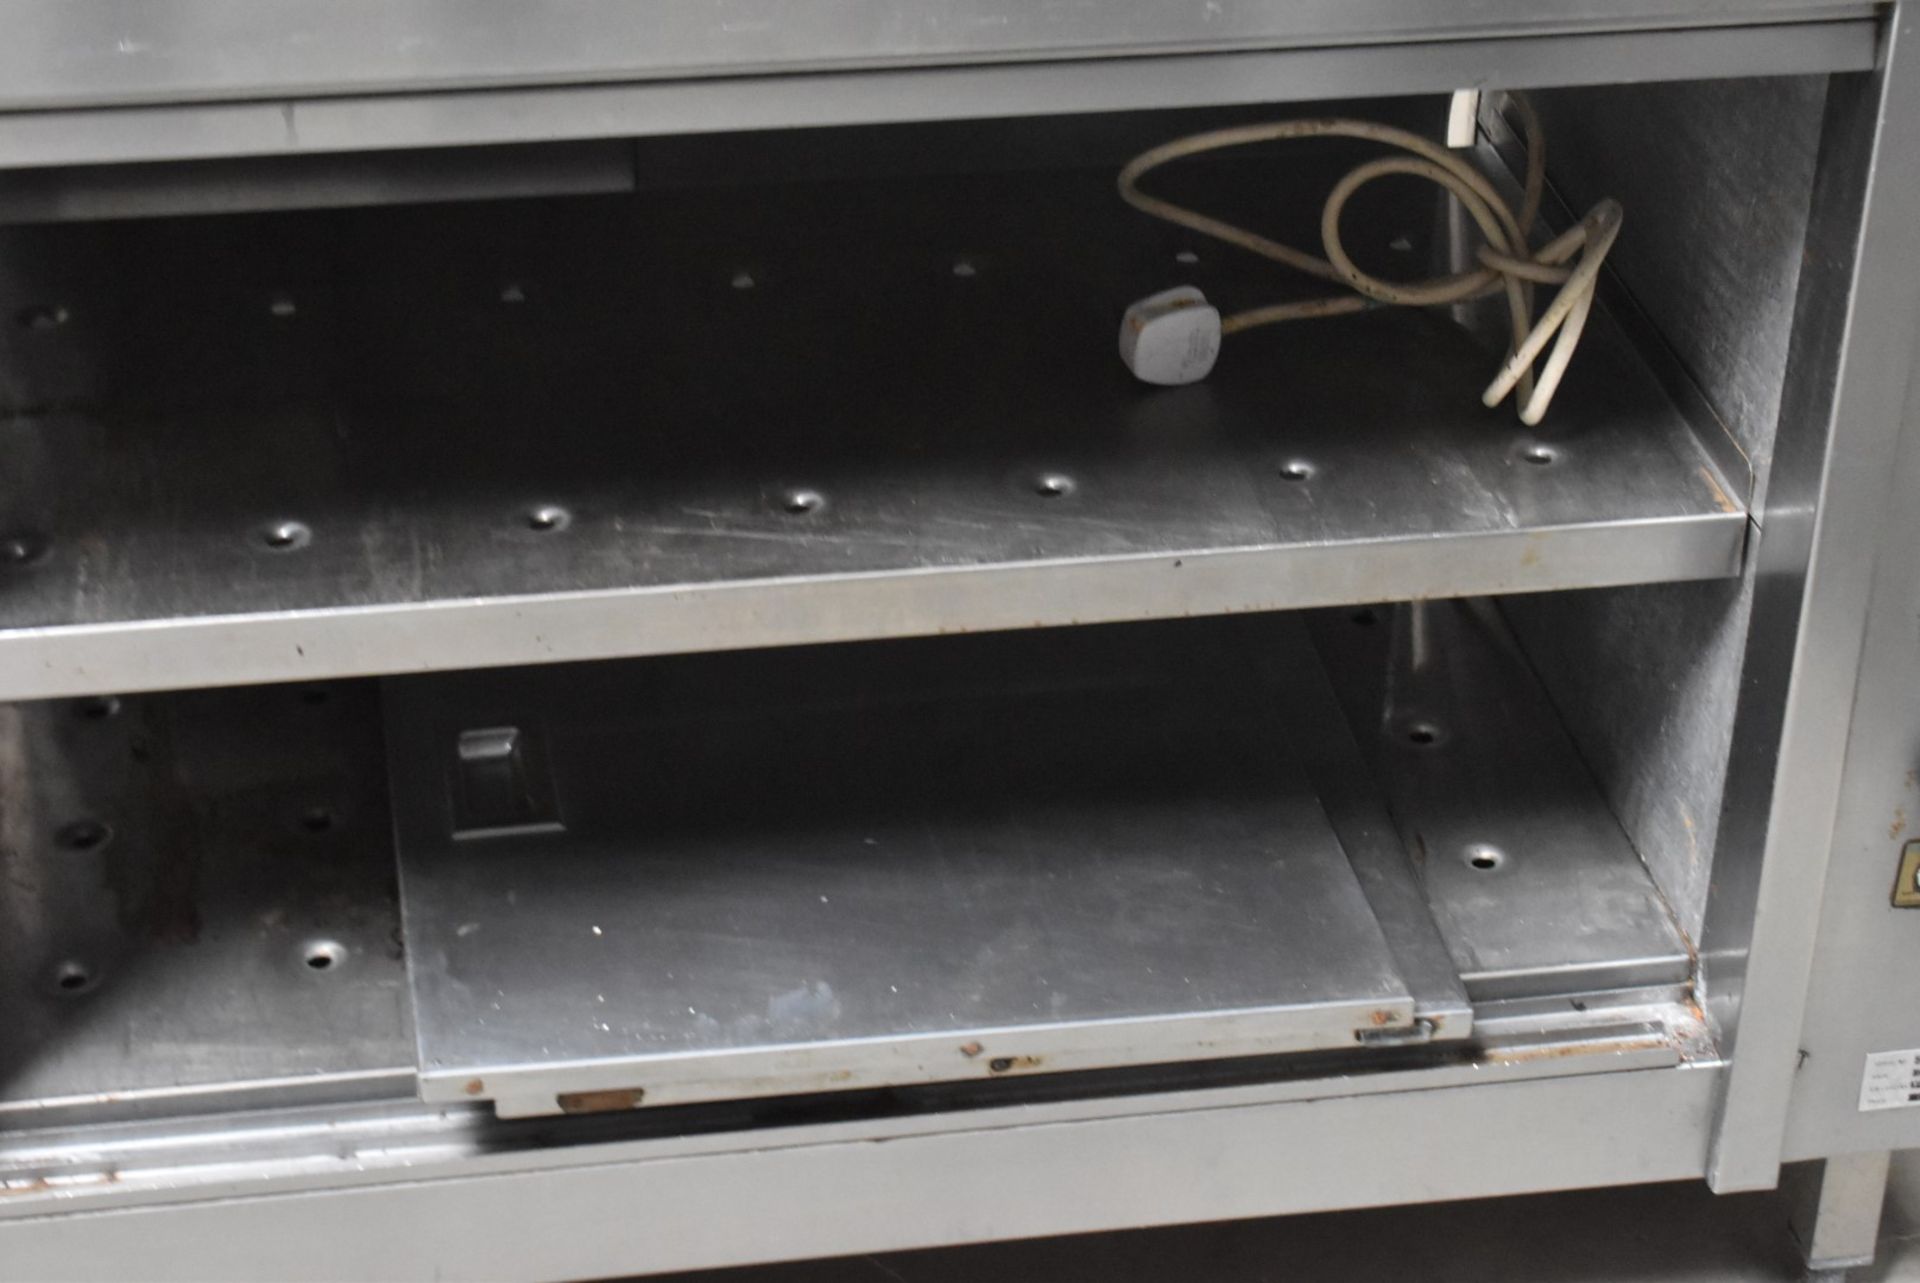 1 x Stainless Steel Hot Cabinet With Overhead Heated Passthrough Shelves and Order Ticket Rail - Image 4 of 11